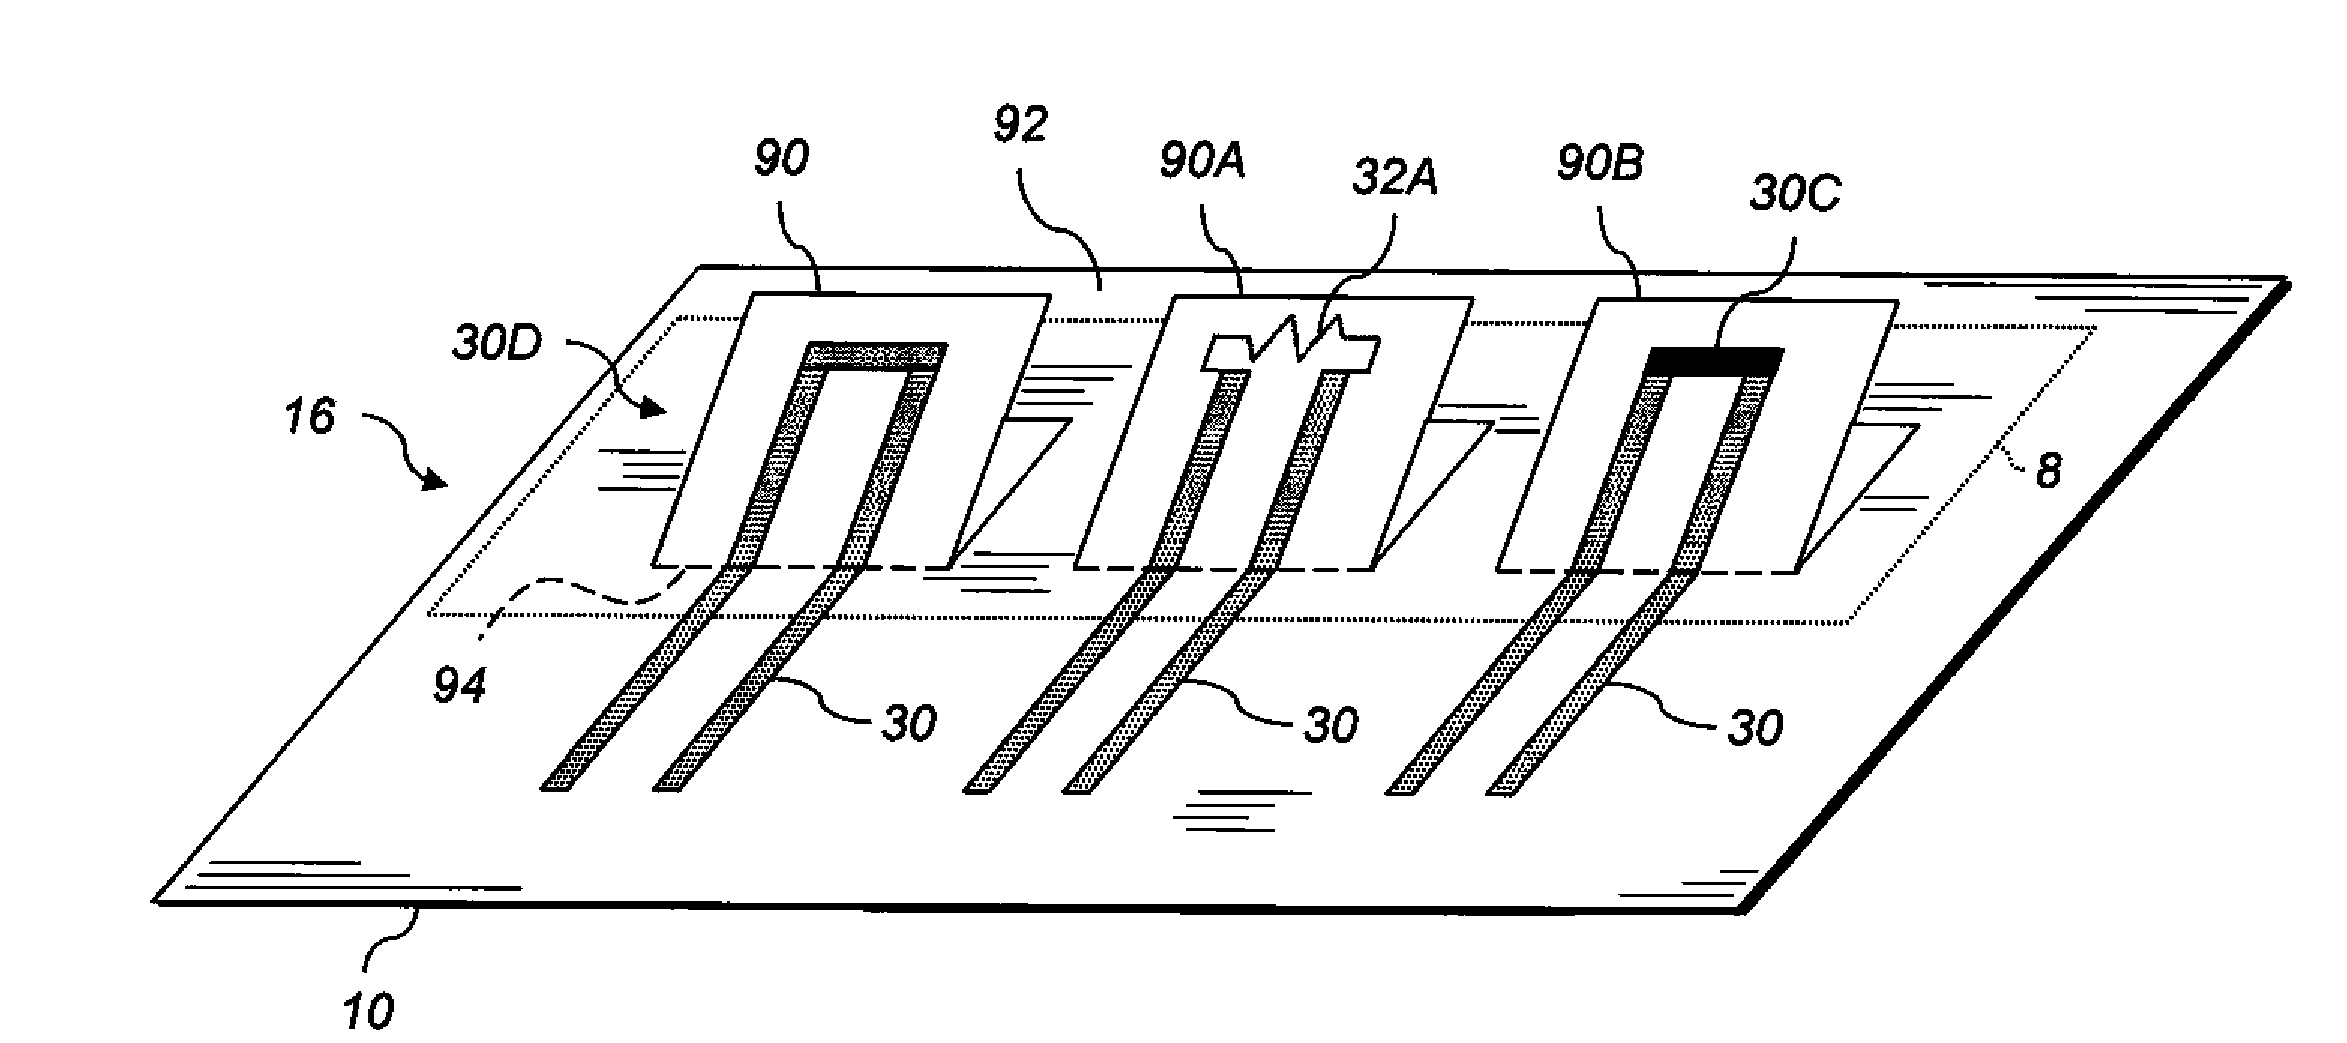 Altering conductor in electronic storage system